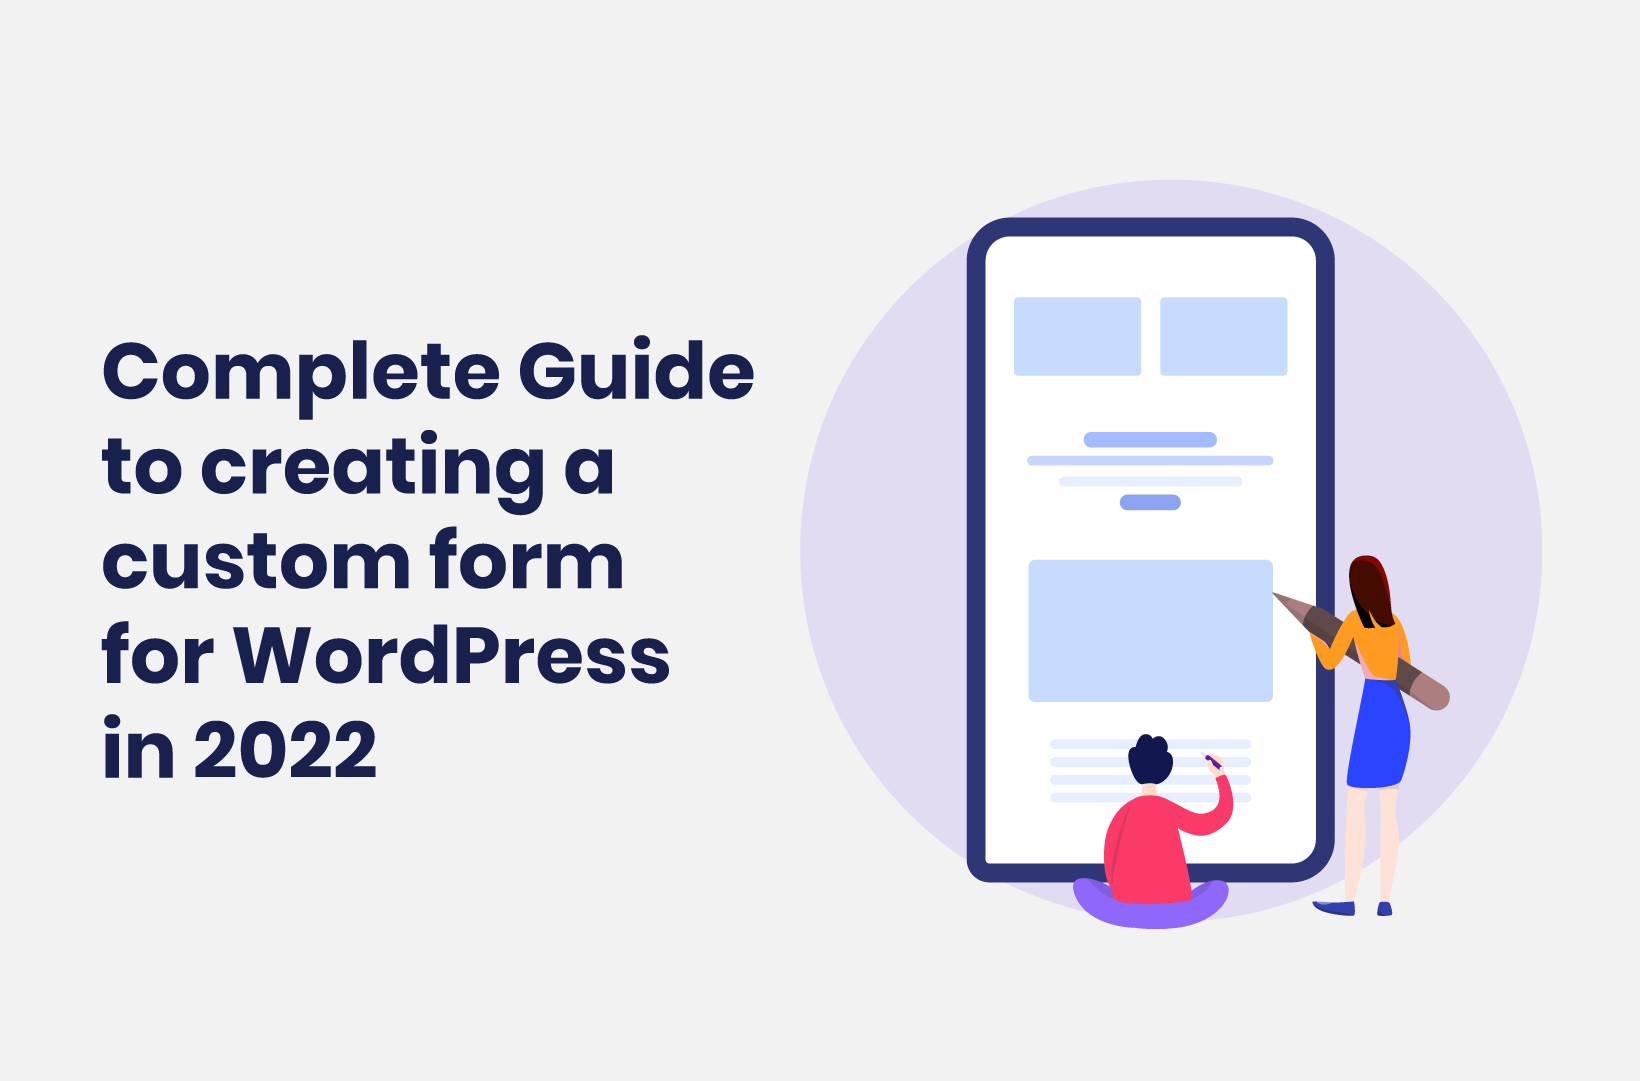 Intro image by blog article The Complete Guide to Creating a Custom Form for WordPress in 2022